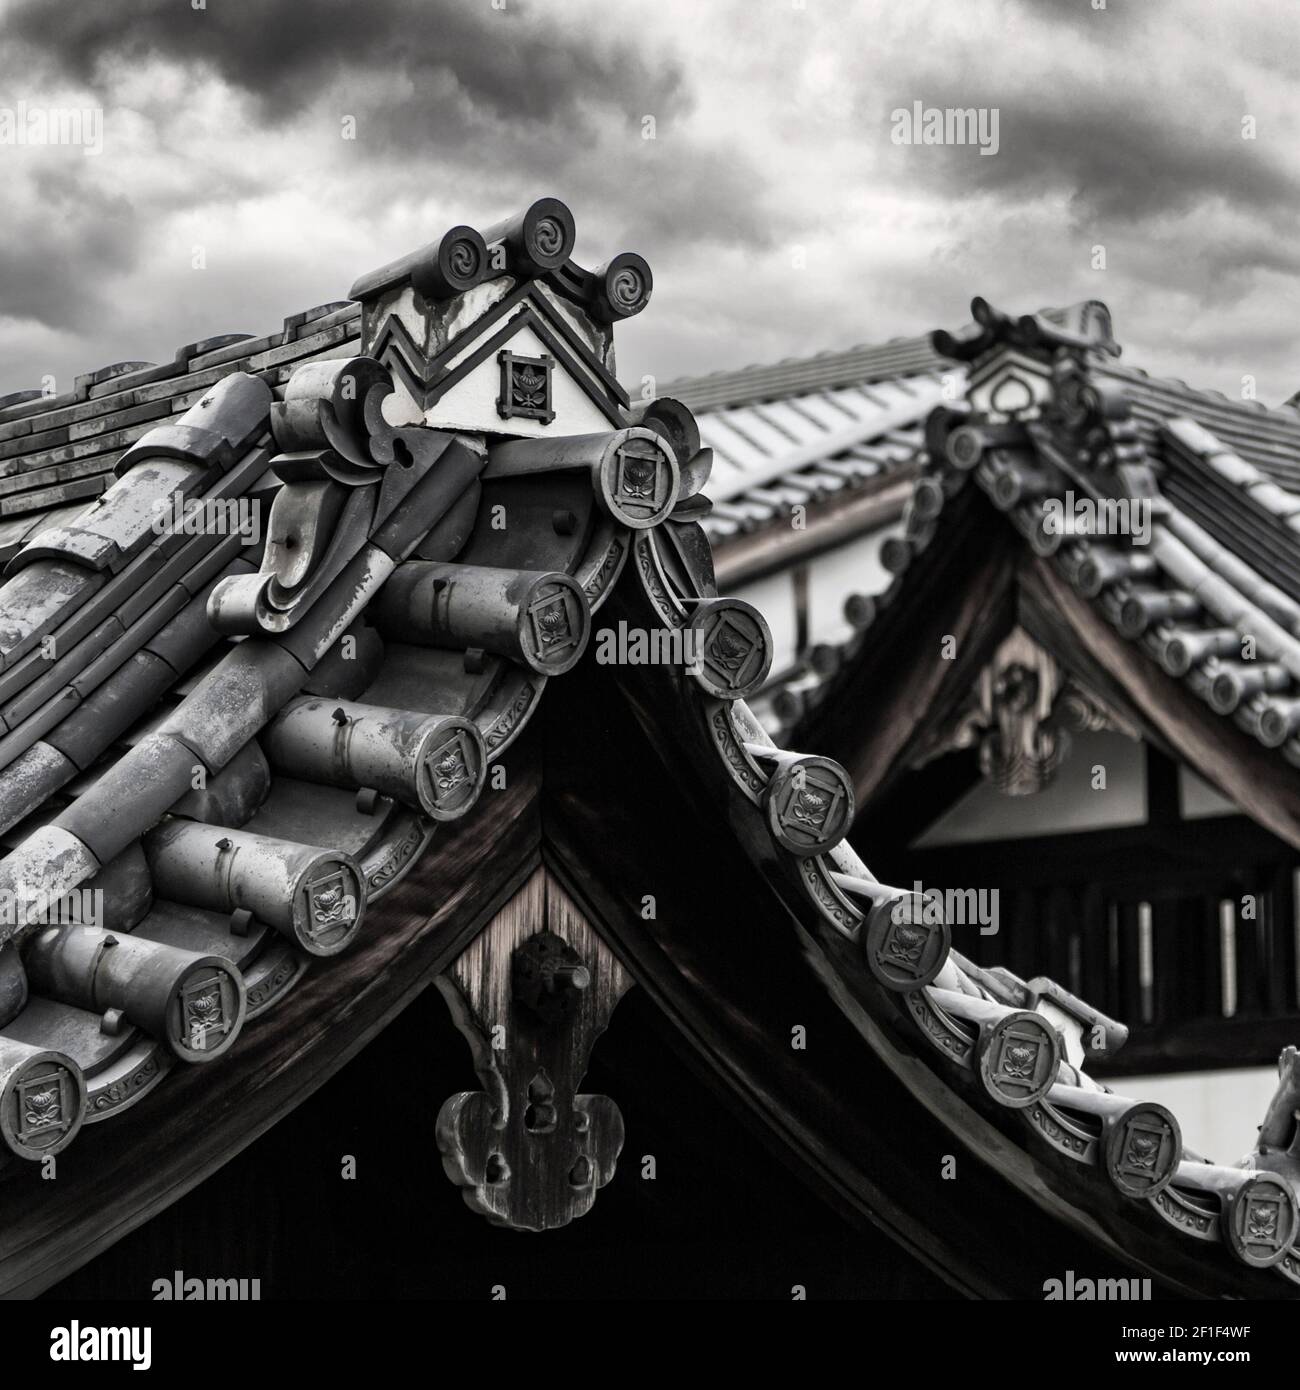 The rooftops of historic Gion, Kyoto, Japan. Black and white detail or the traditional Japanese architecture. Stock Photo